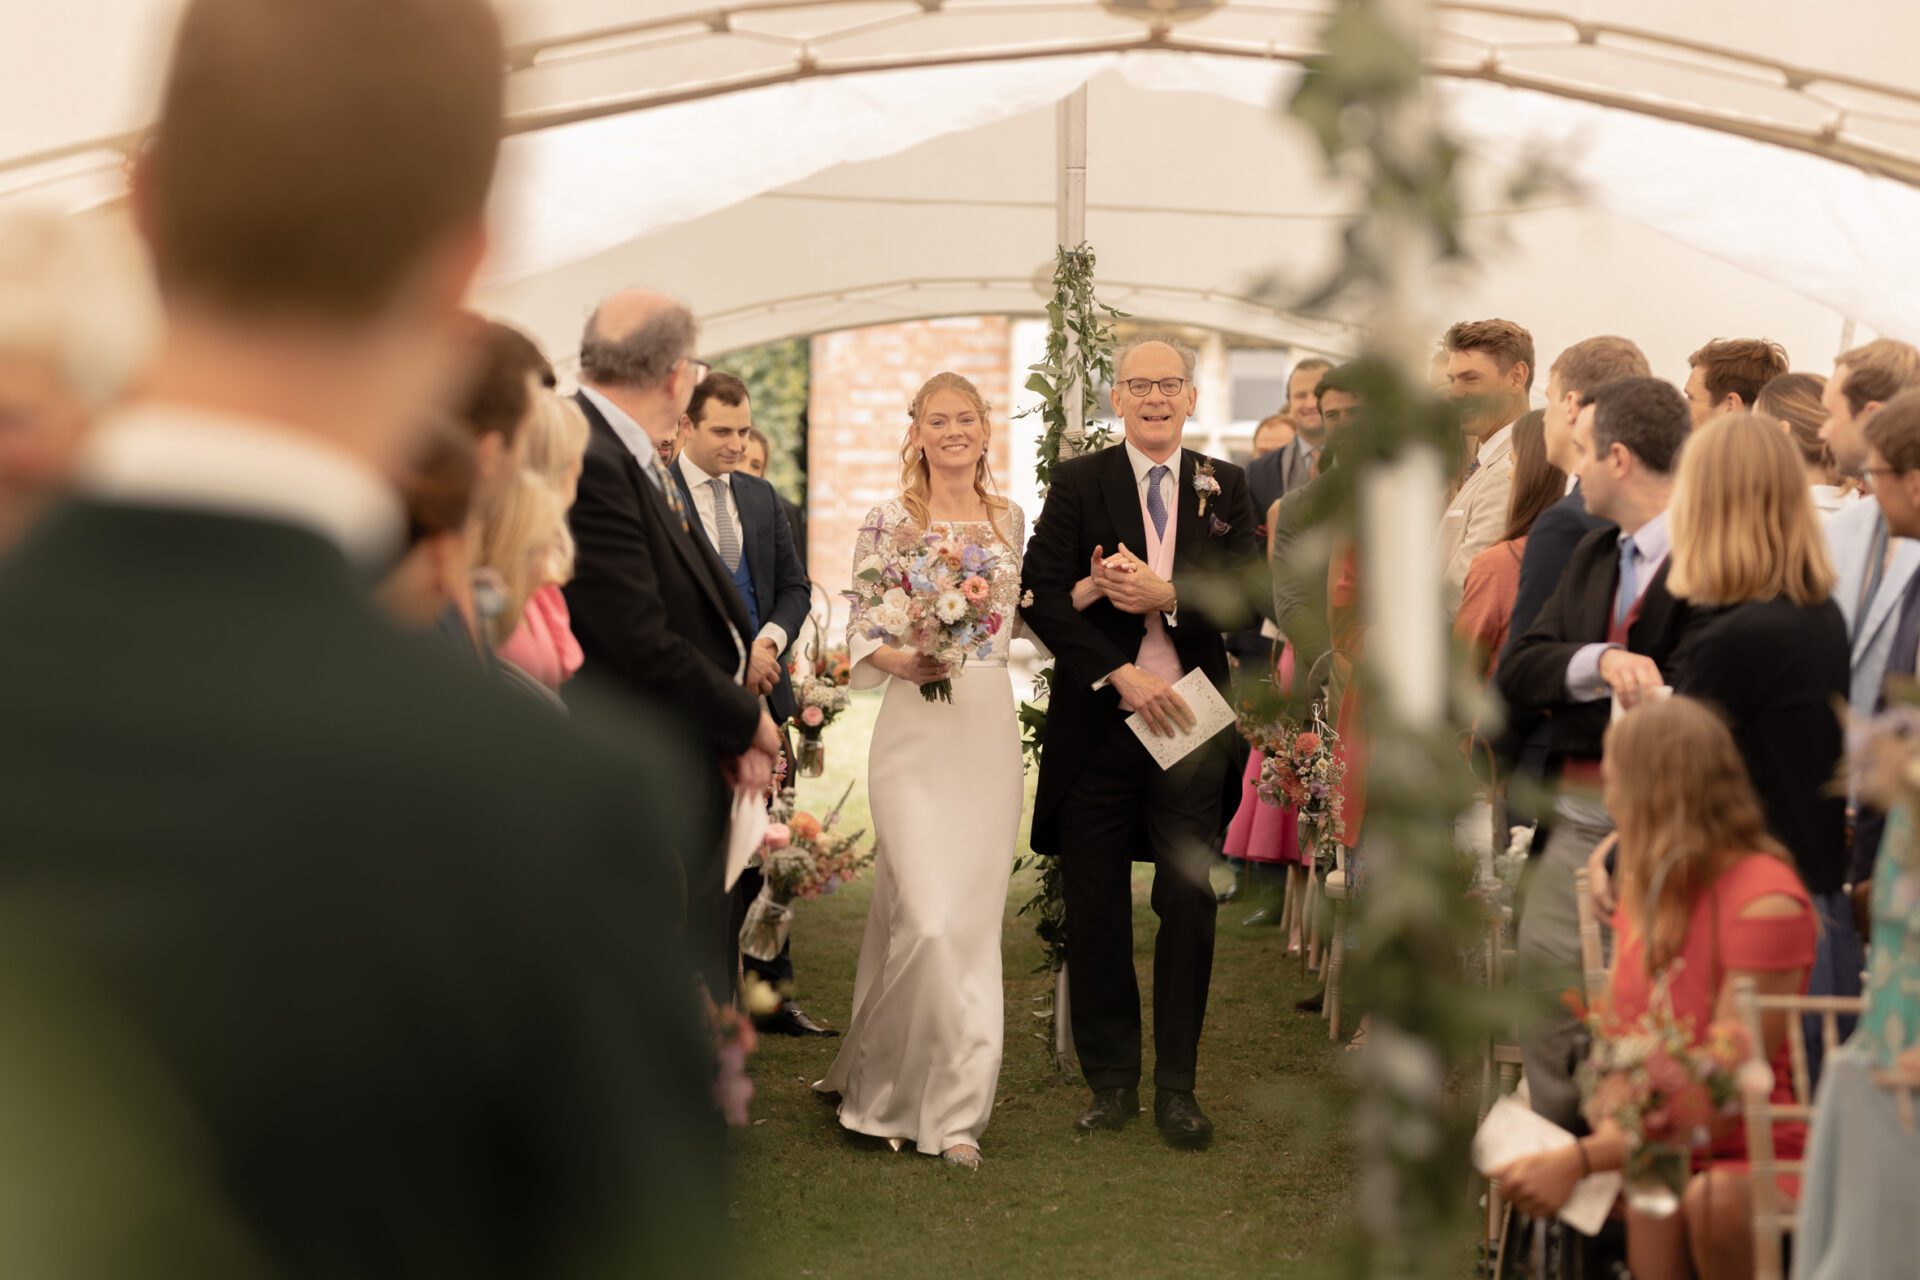 The bride and her father walk down the aisle at Brickwall House